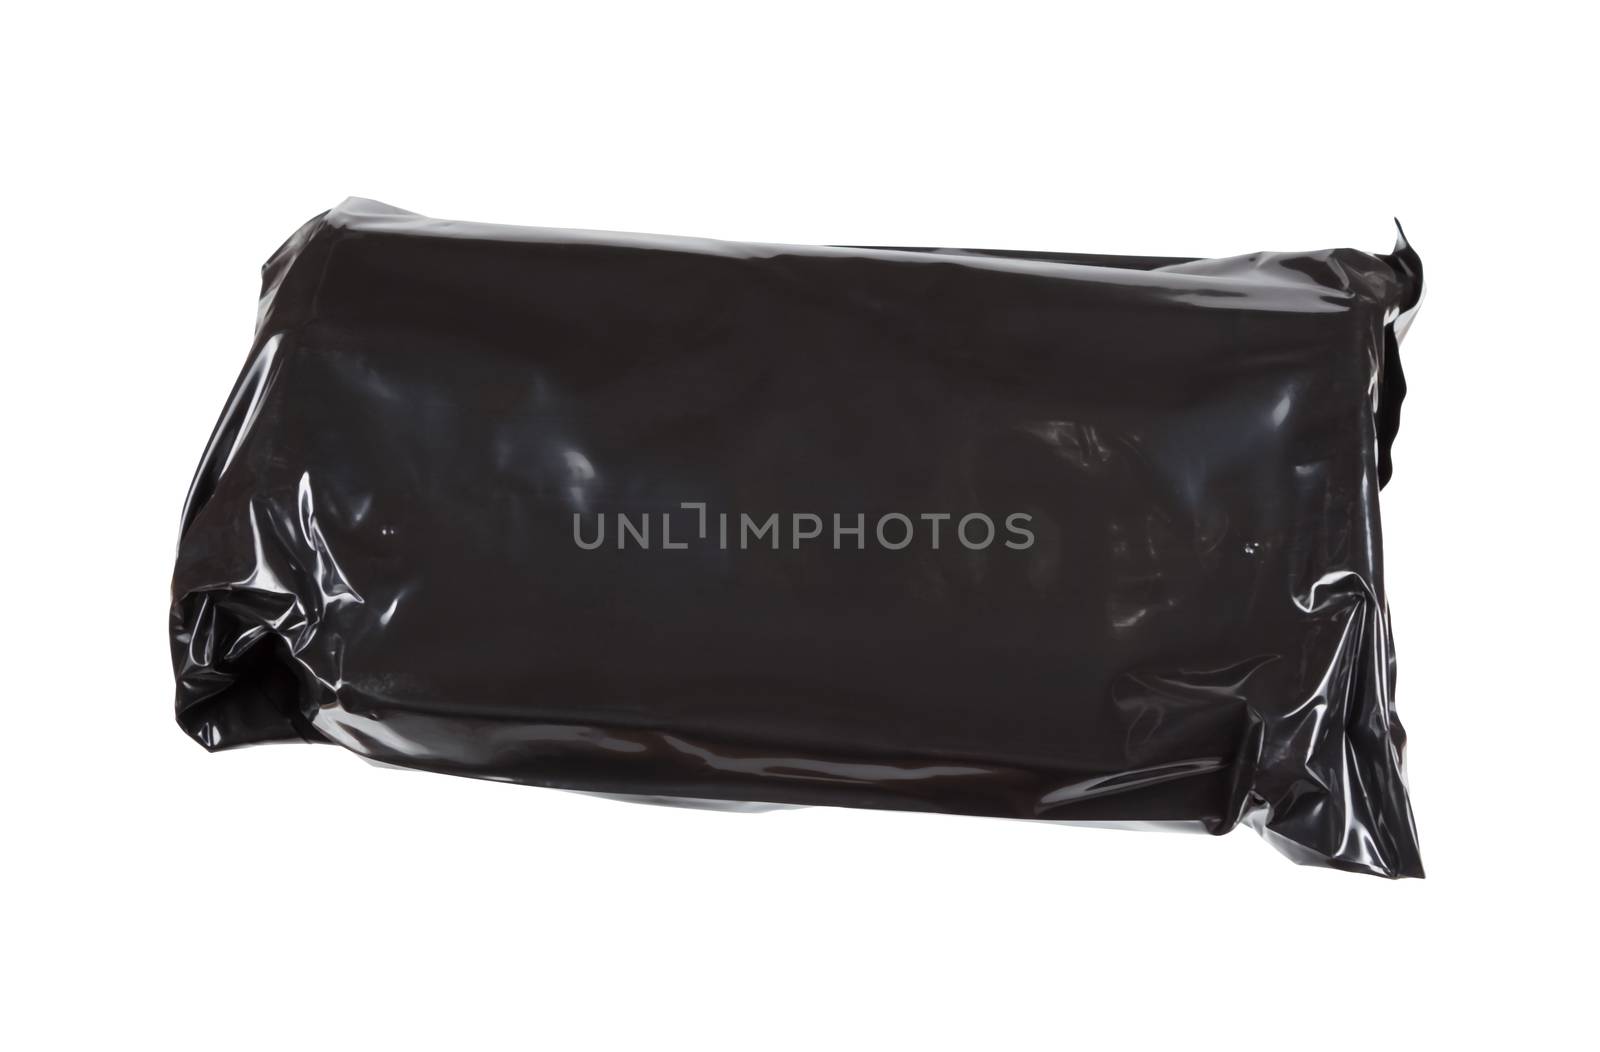 black cellophane packet with unknown contents isolated on white background